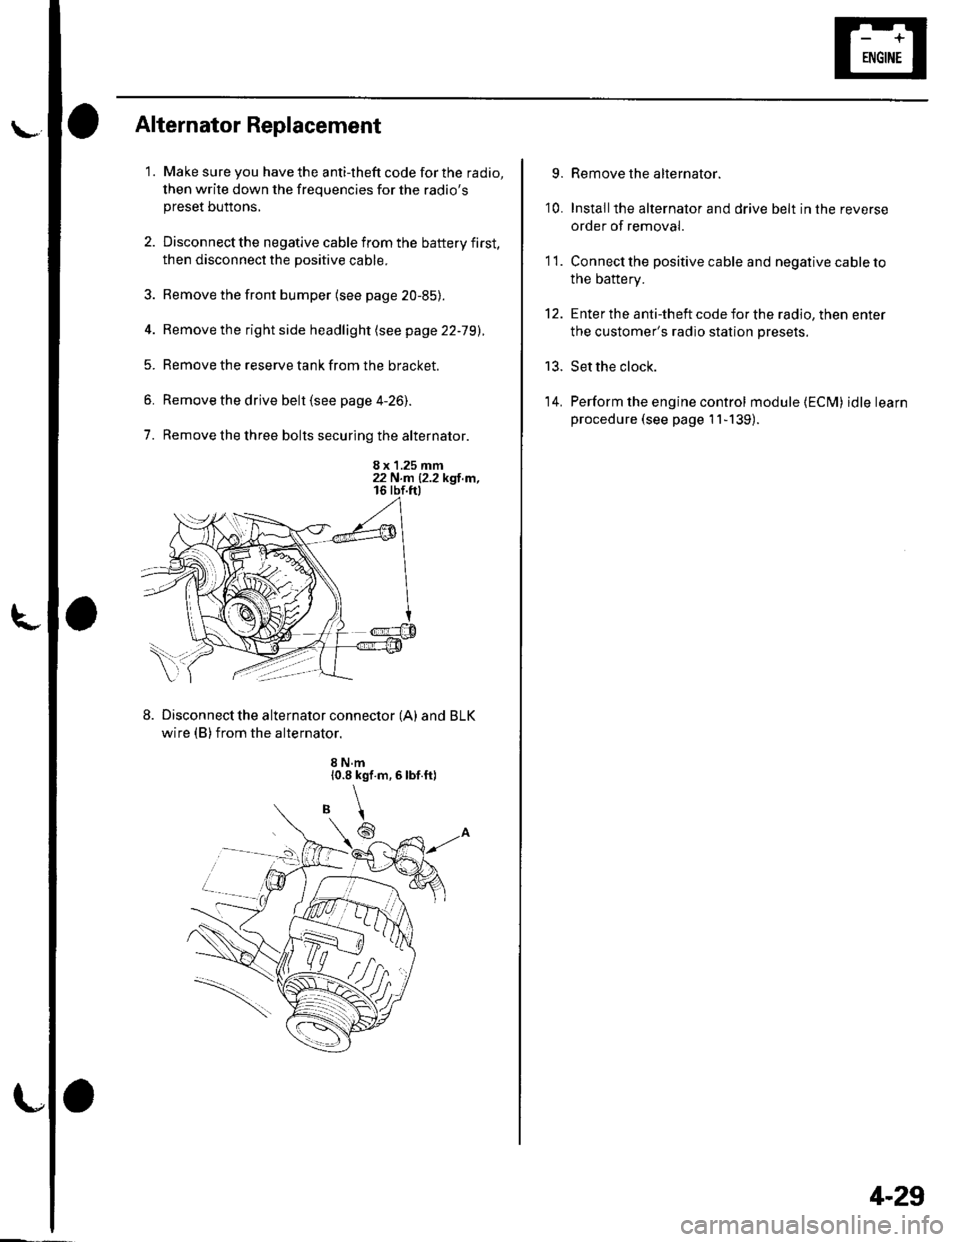 HONDA CIVIC 2002 7.G Workshop Manual l\-Alternator Replacement
1. Make sure you have the anti-theft code for the radio,
then write down the frequencies for the radiospreset buttons,
2. Disconnect the negative cable from the battery firs